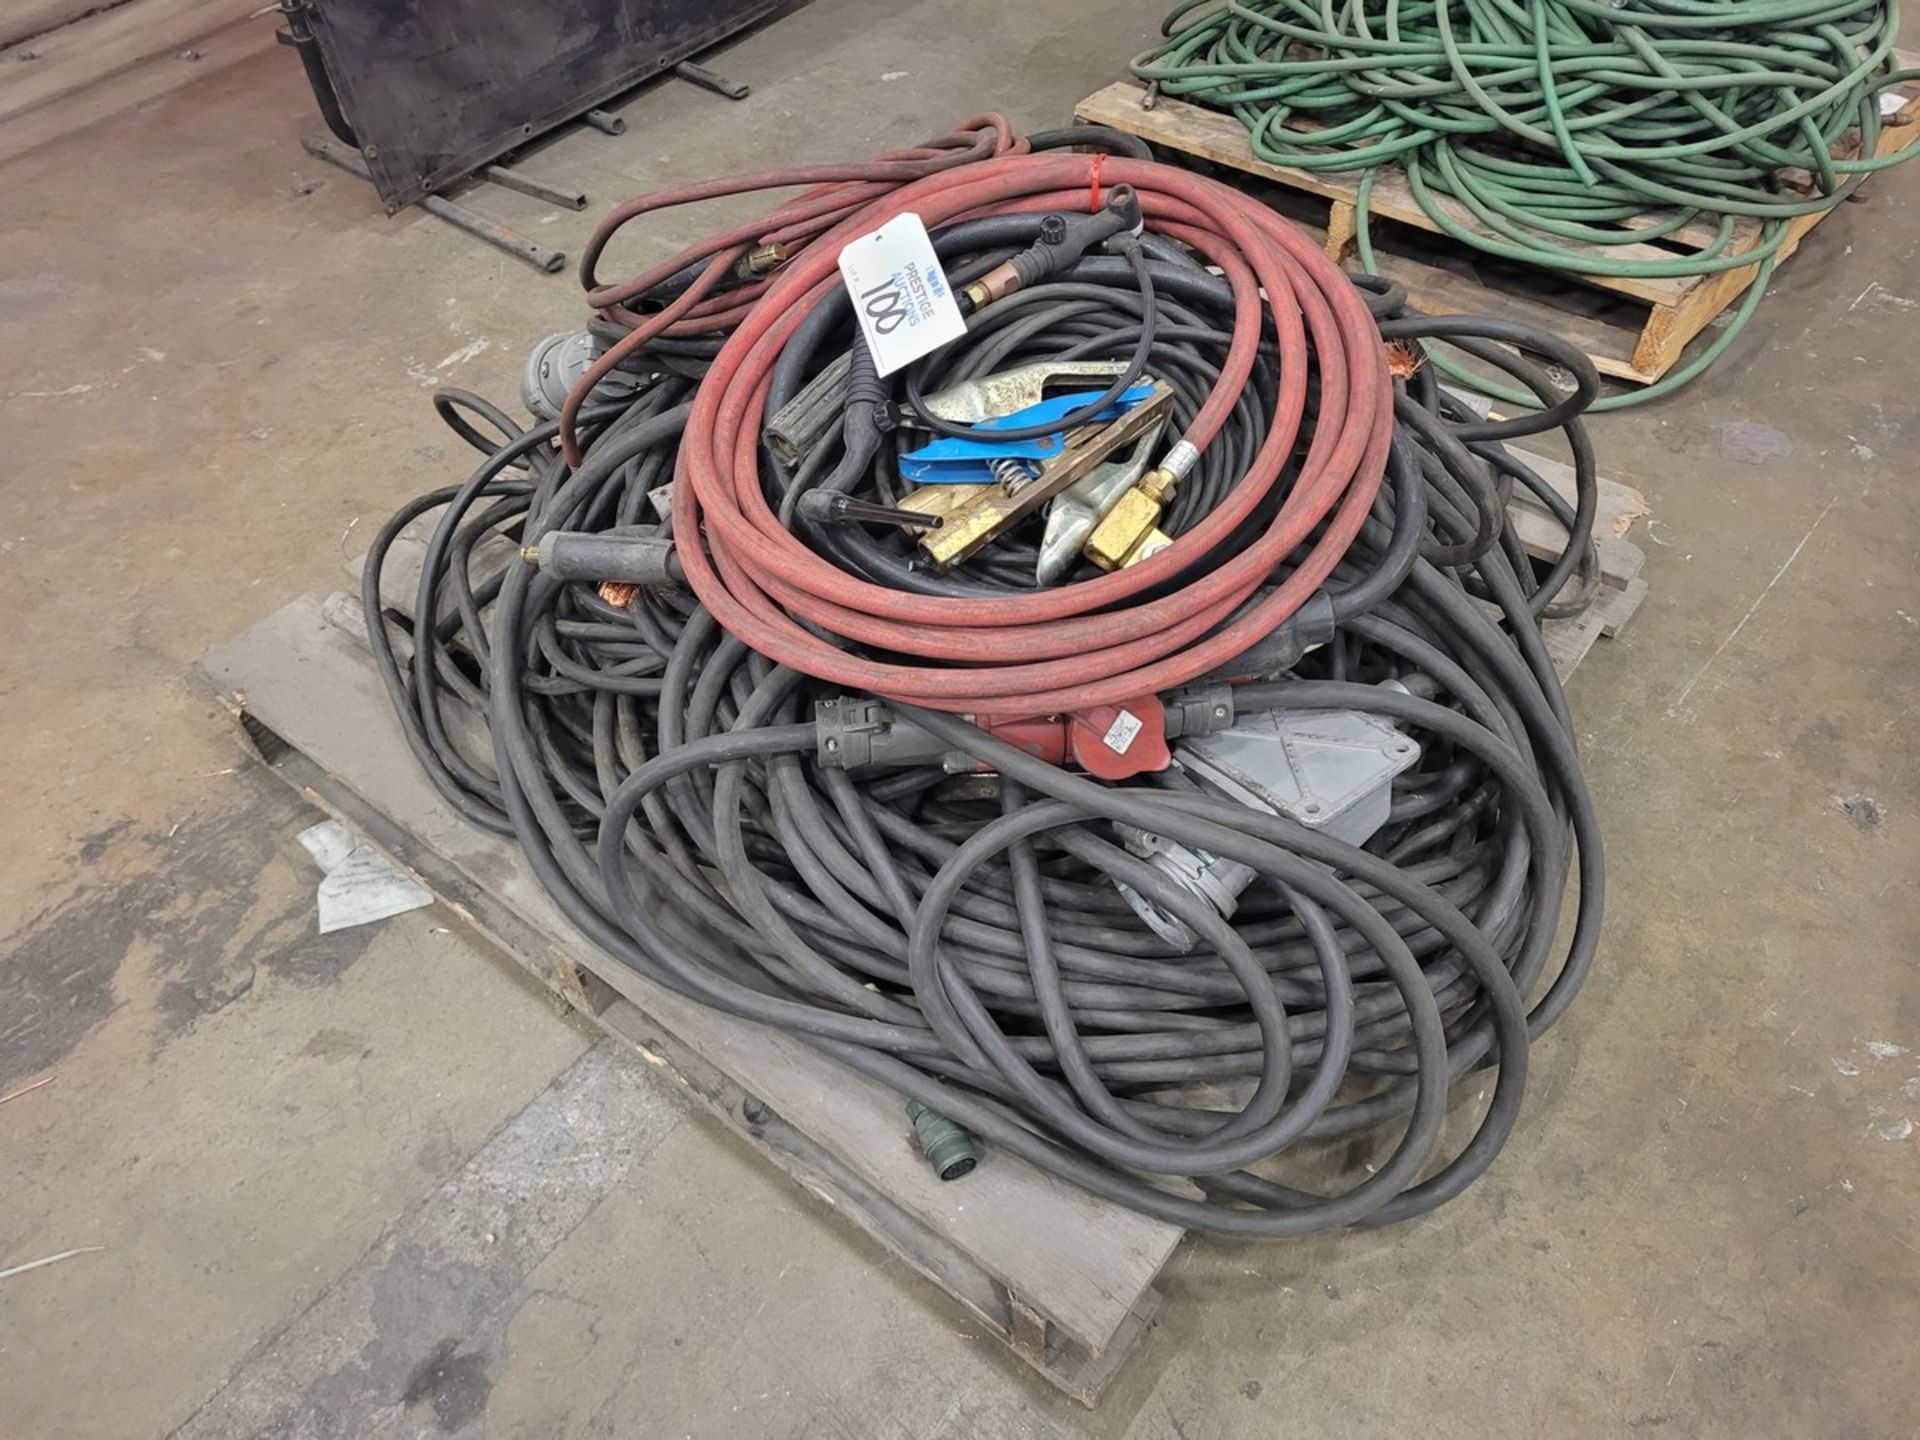 (2) Pallets of Welding Ground Wires, Welding Leads, 3PH Power Cords, Welding Hose Etc.